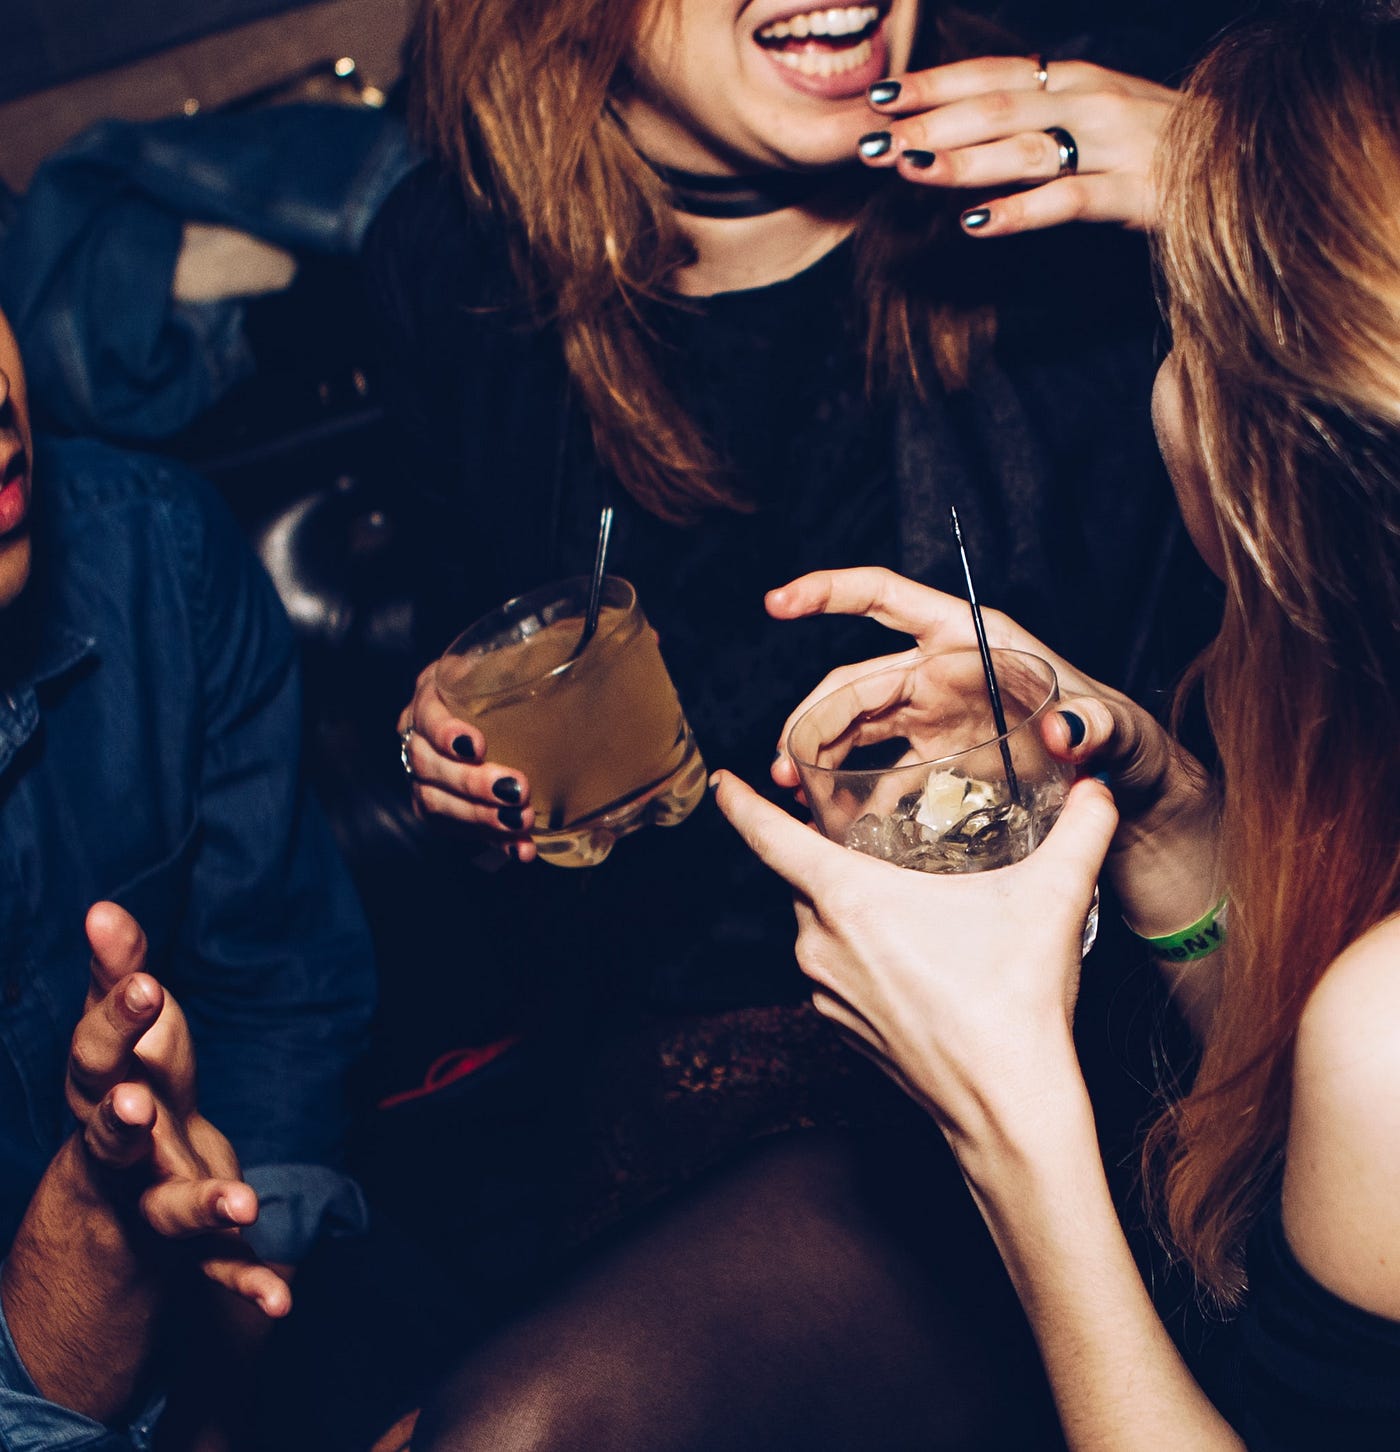 Does Alcohol Make You Sexy?. The study supports the idea. And I